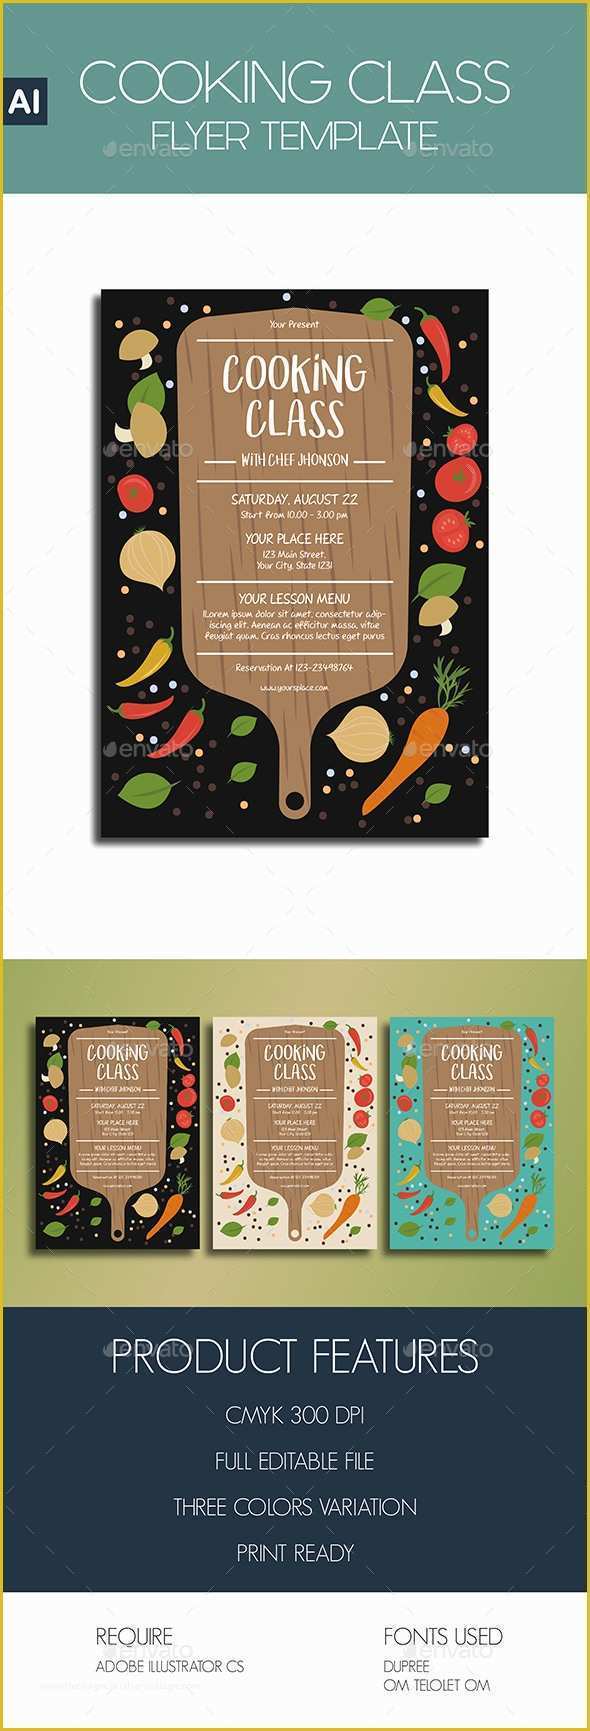 Cooking Flyers Templates Free Of Cooking Class Flyer Template by Lyllopop